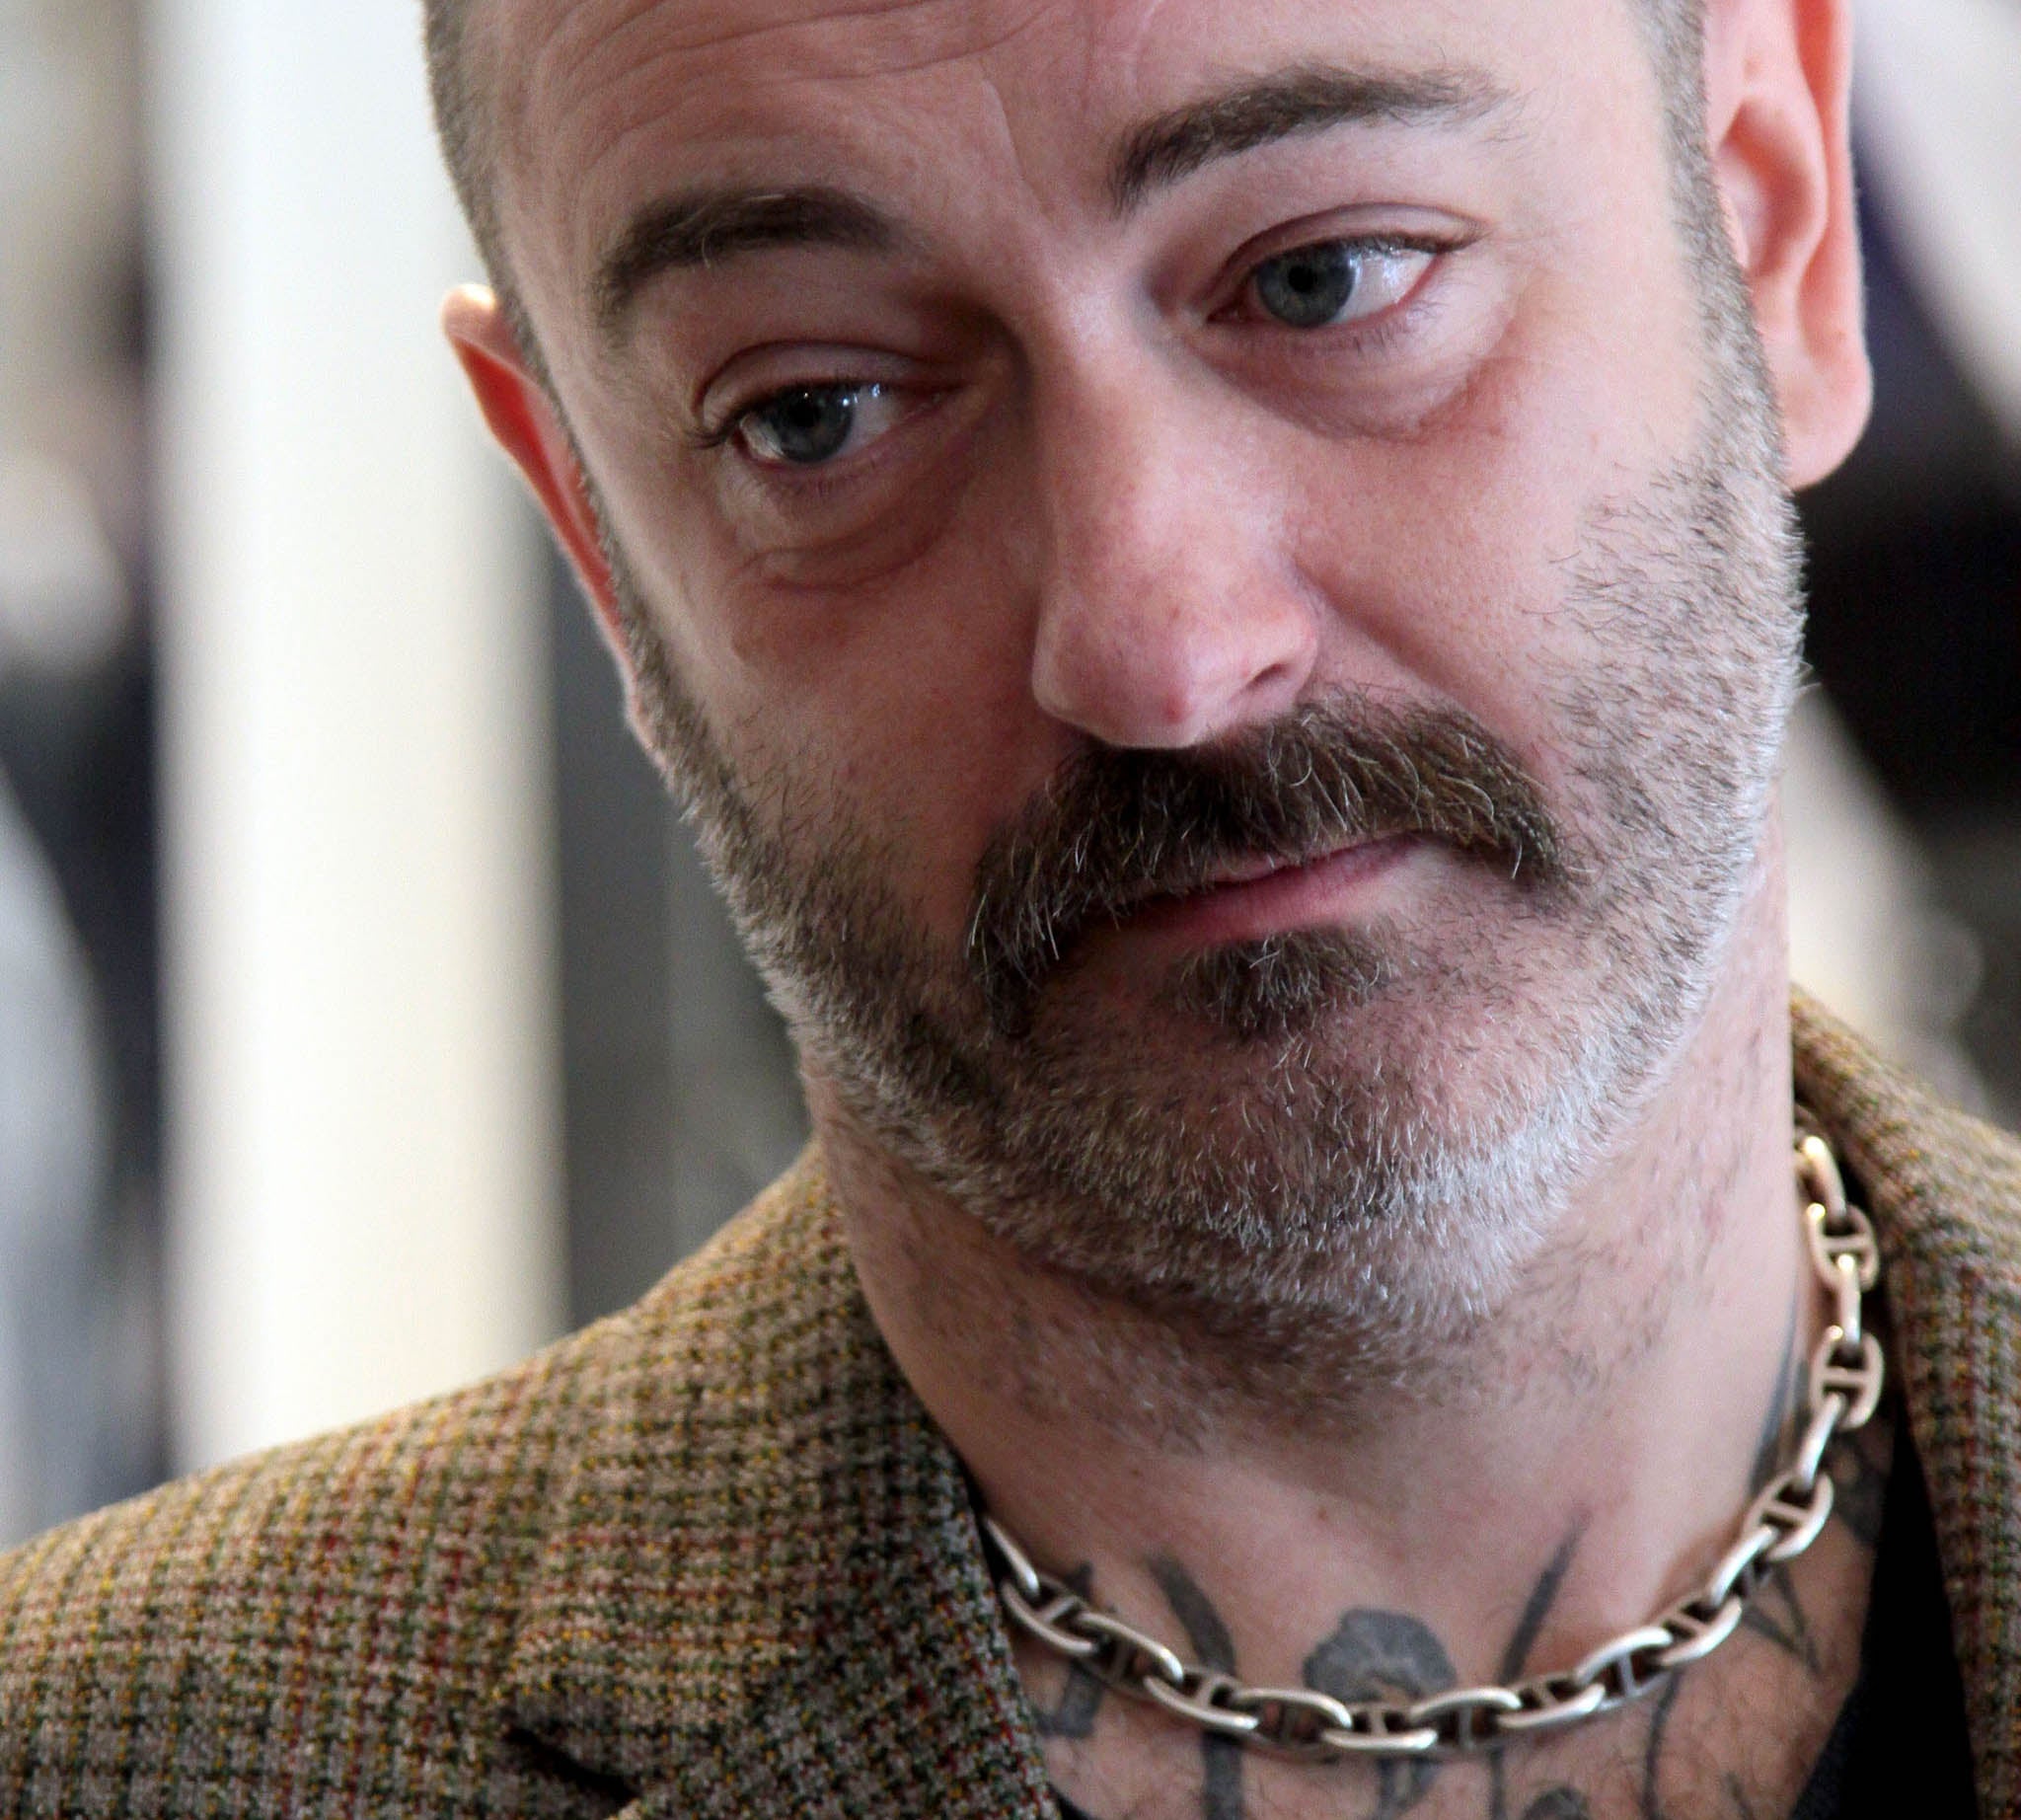 Artist Douglas Gordon will have to pay for damaged to HOME theatre